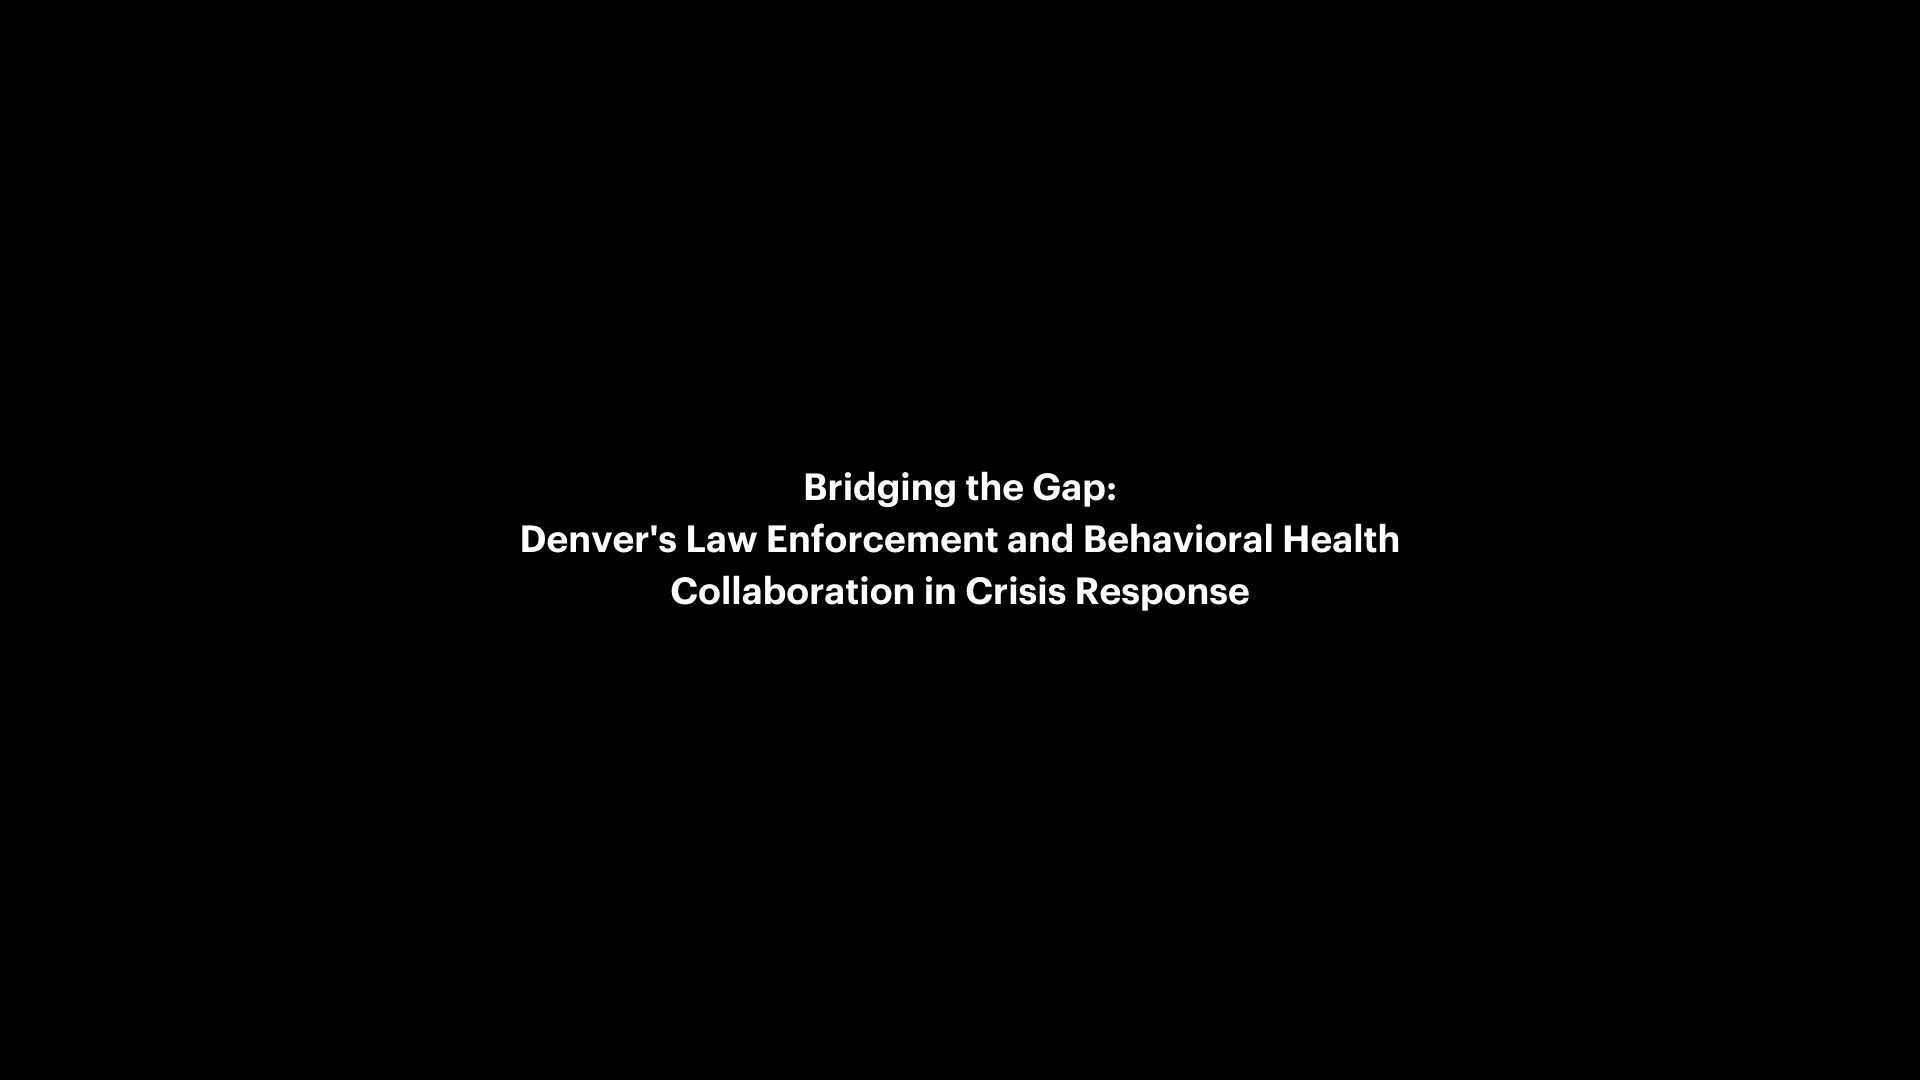 Image for Bridging the Gap: Denver's Law Enforcement and Behavioral Health Collaboration in Crisis Response